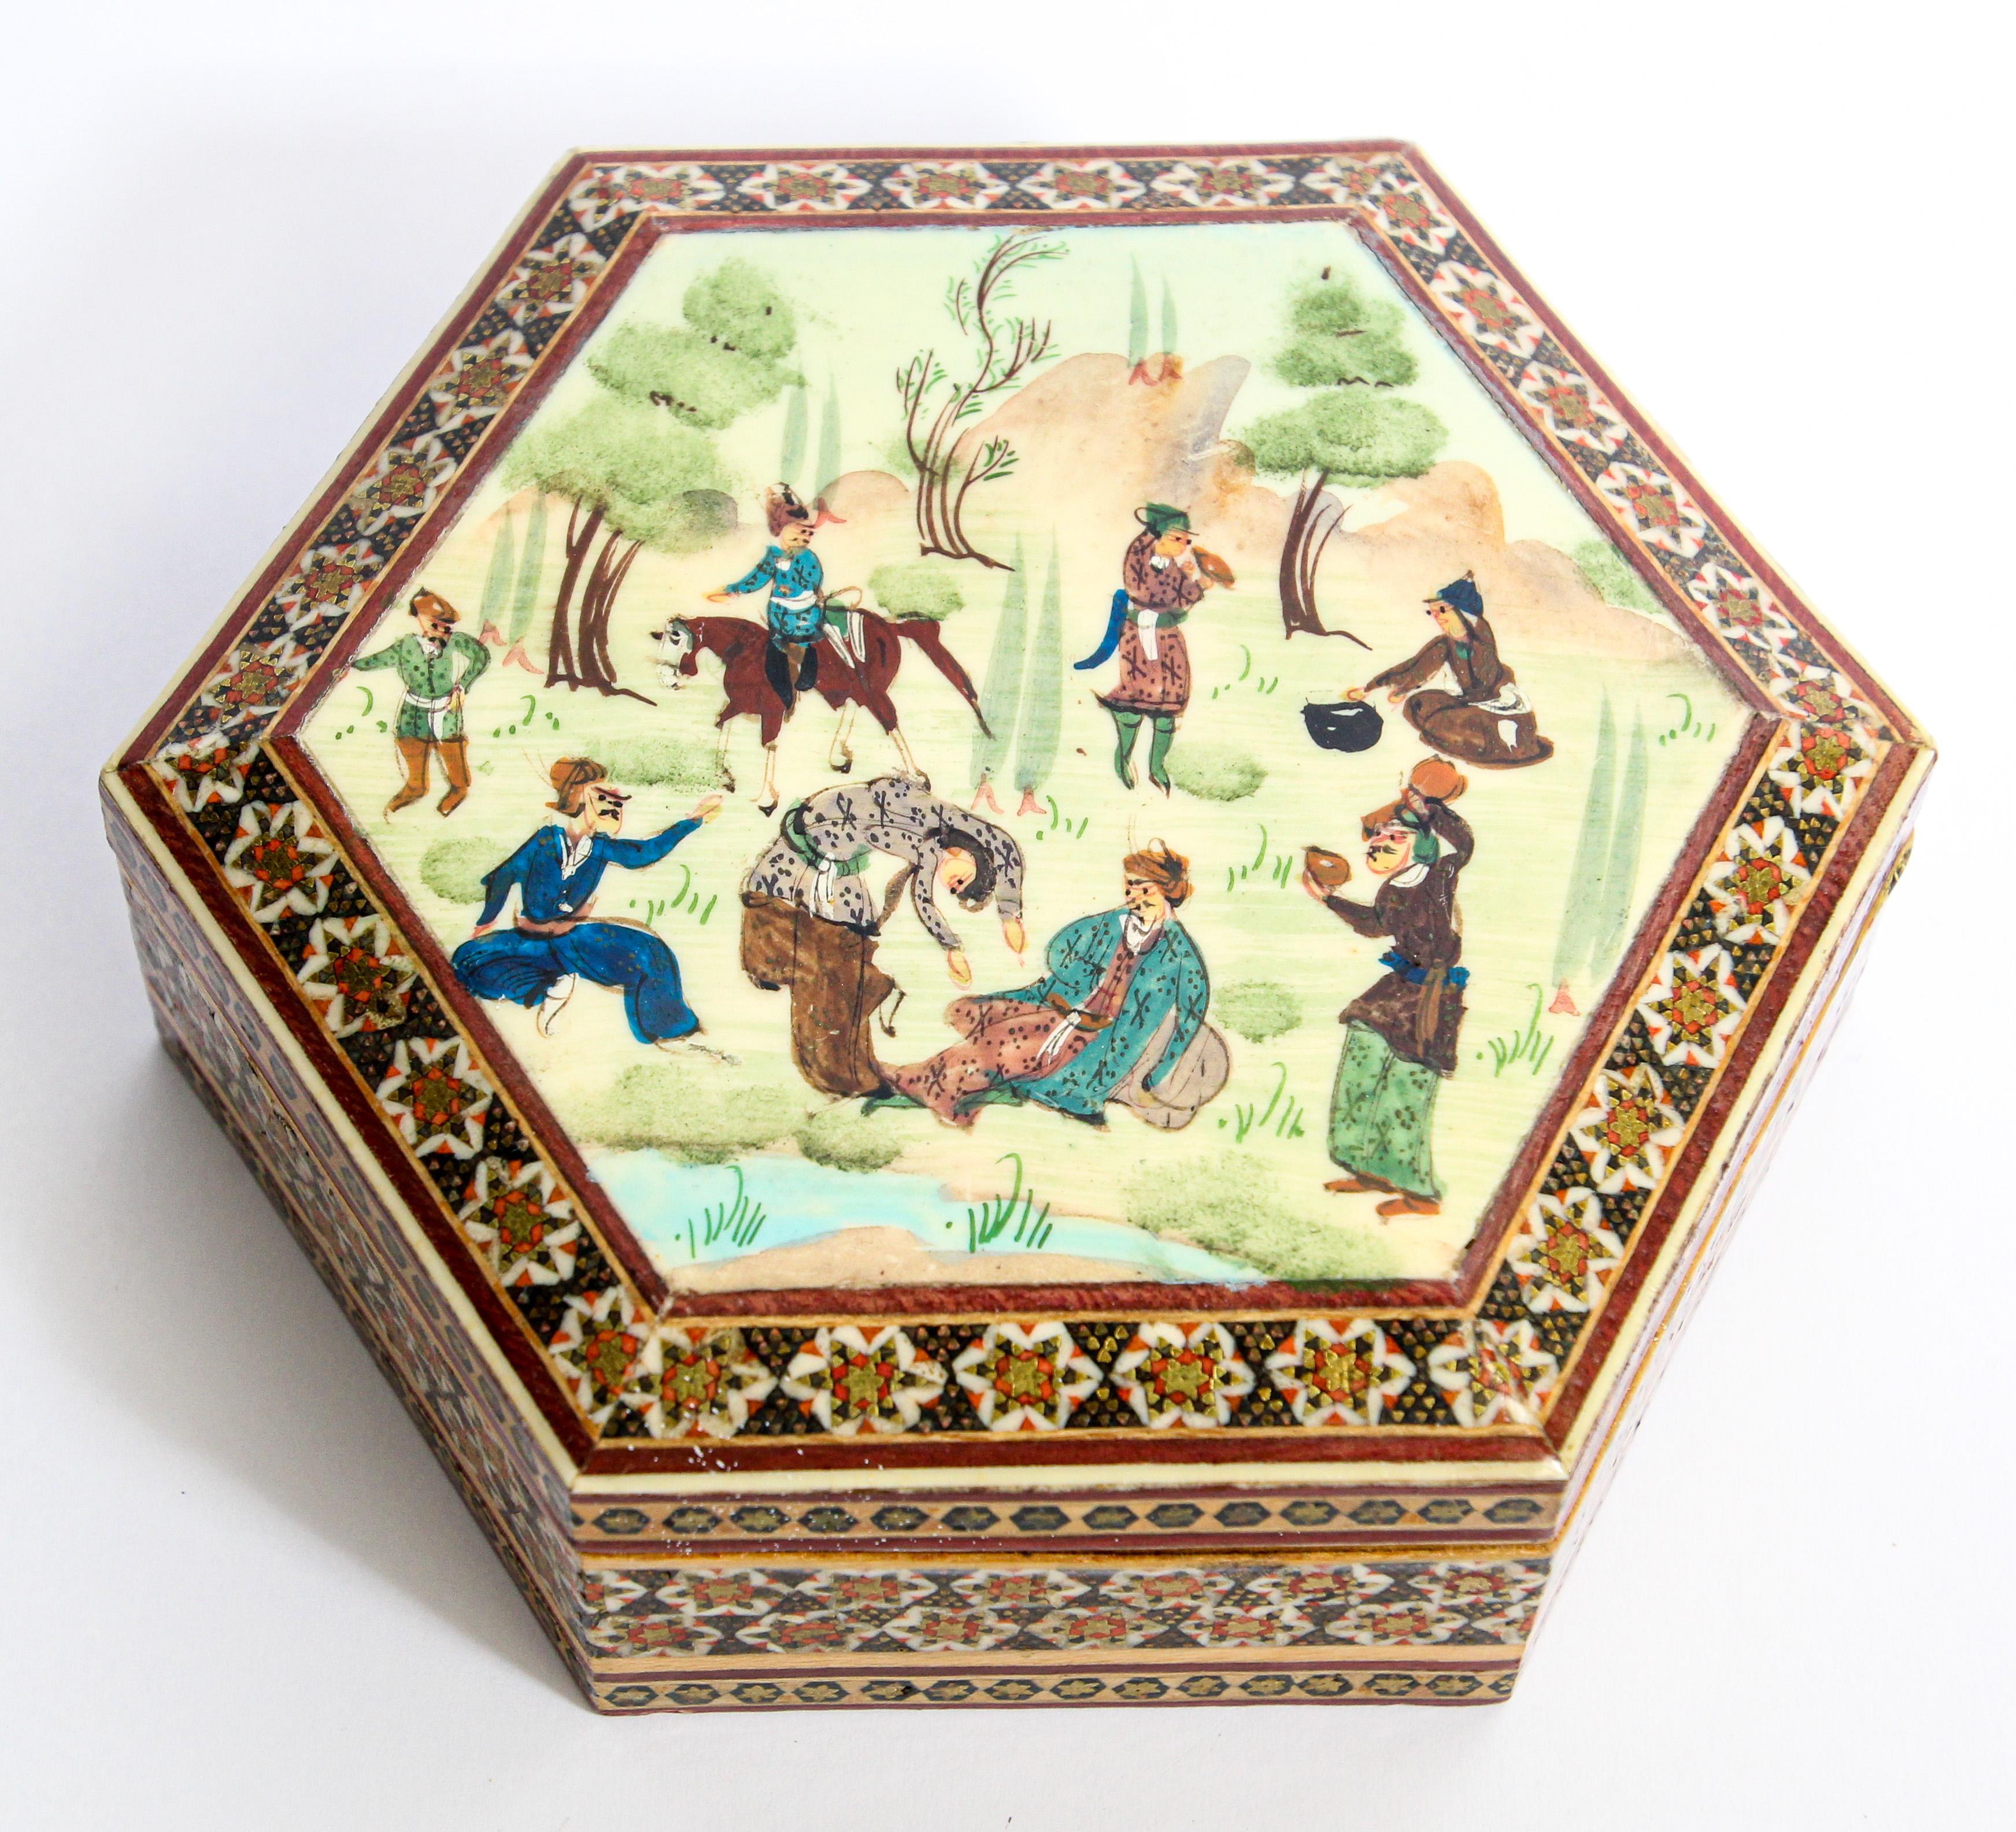 Khatam Persian Micro Mosaic Marquetry Inlaid Jewelry Trinket Box 1950's In Good Condition For Sale In North Hollywood, CA